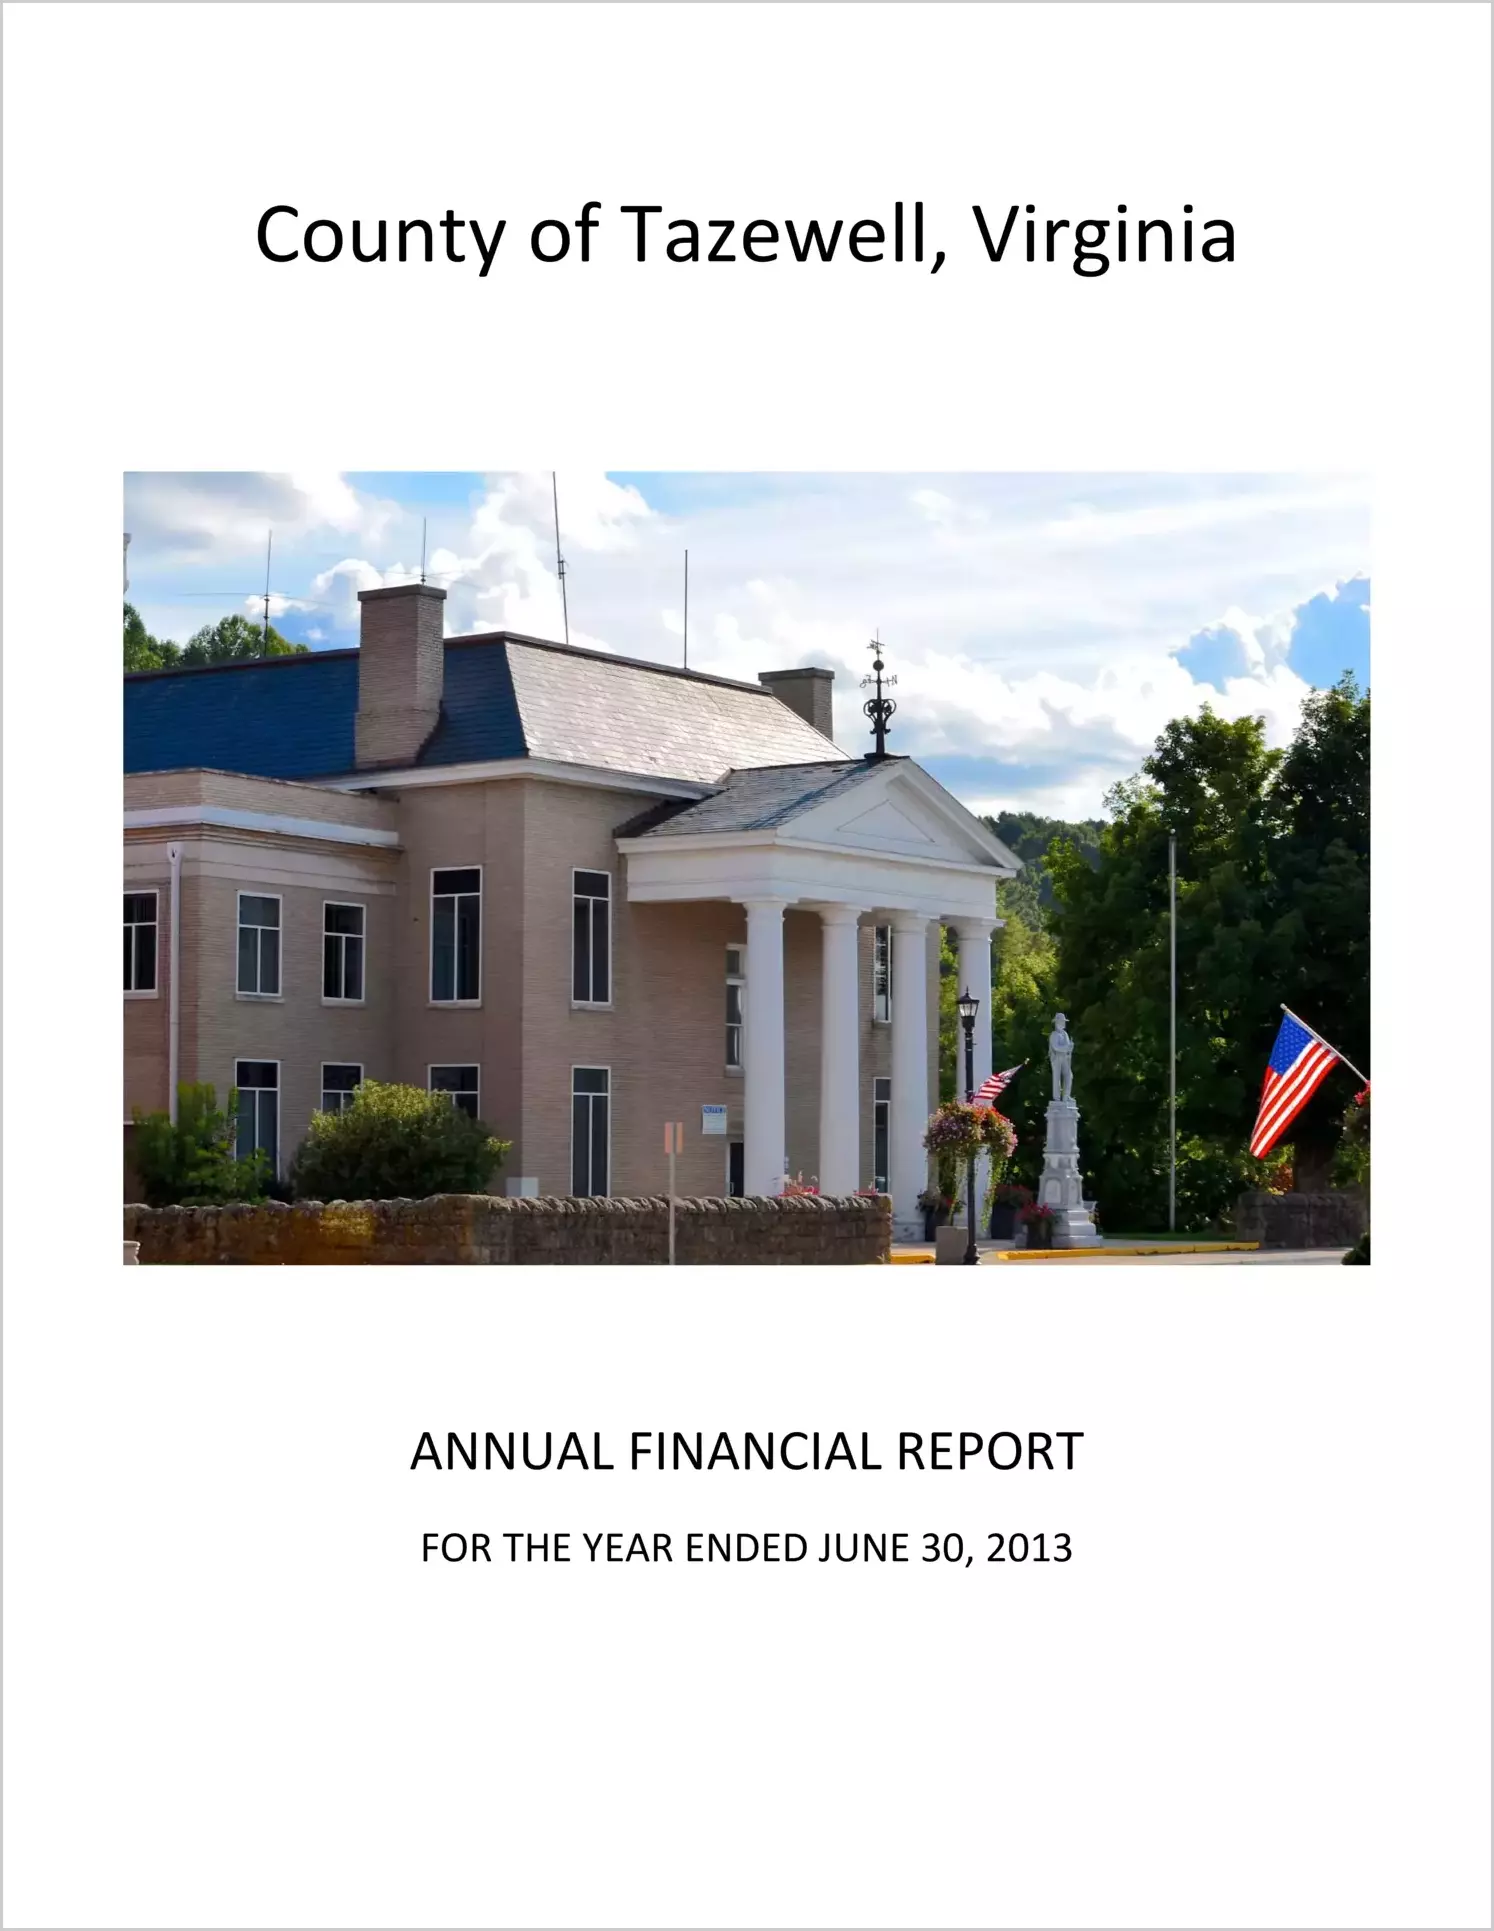 2013 Annual Financial Report for County of Tazewell